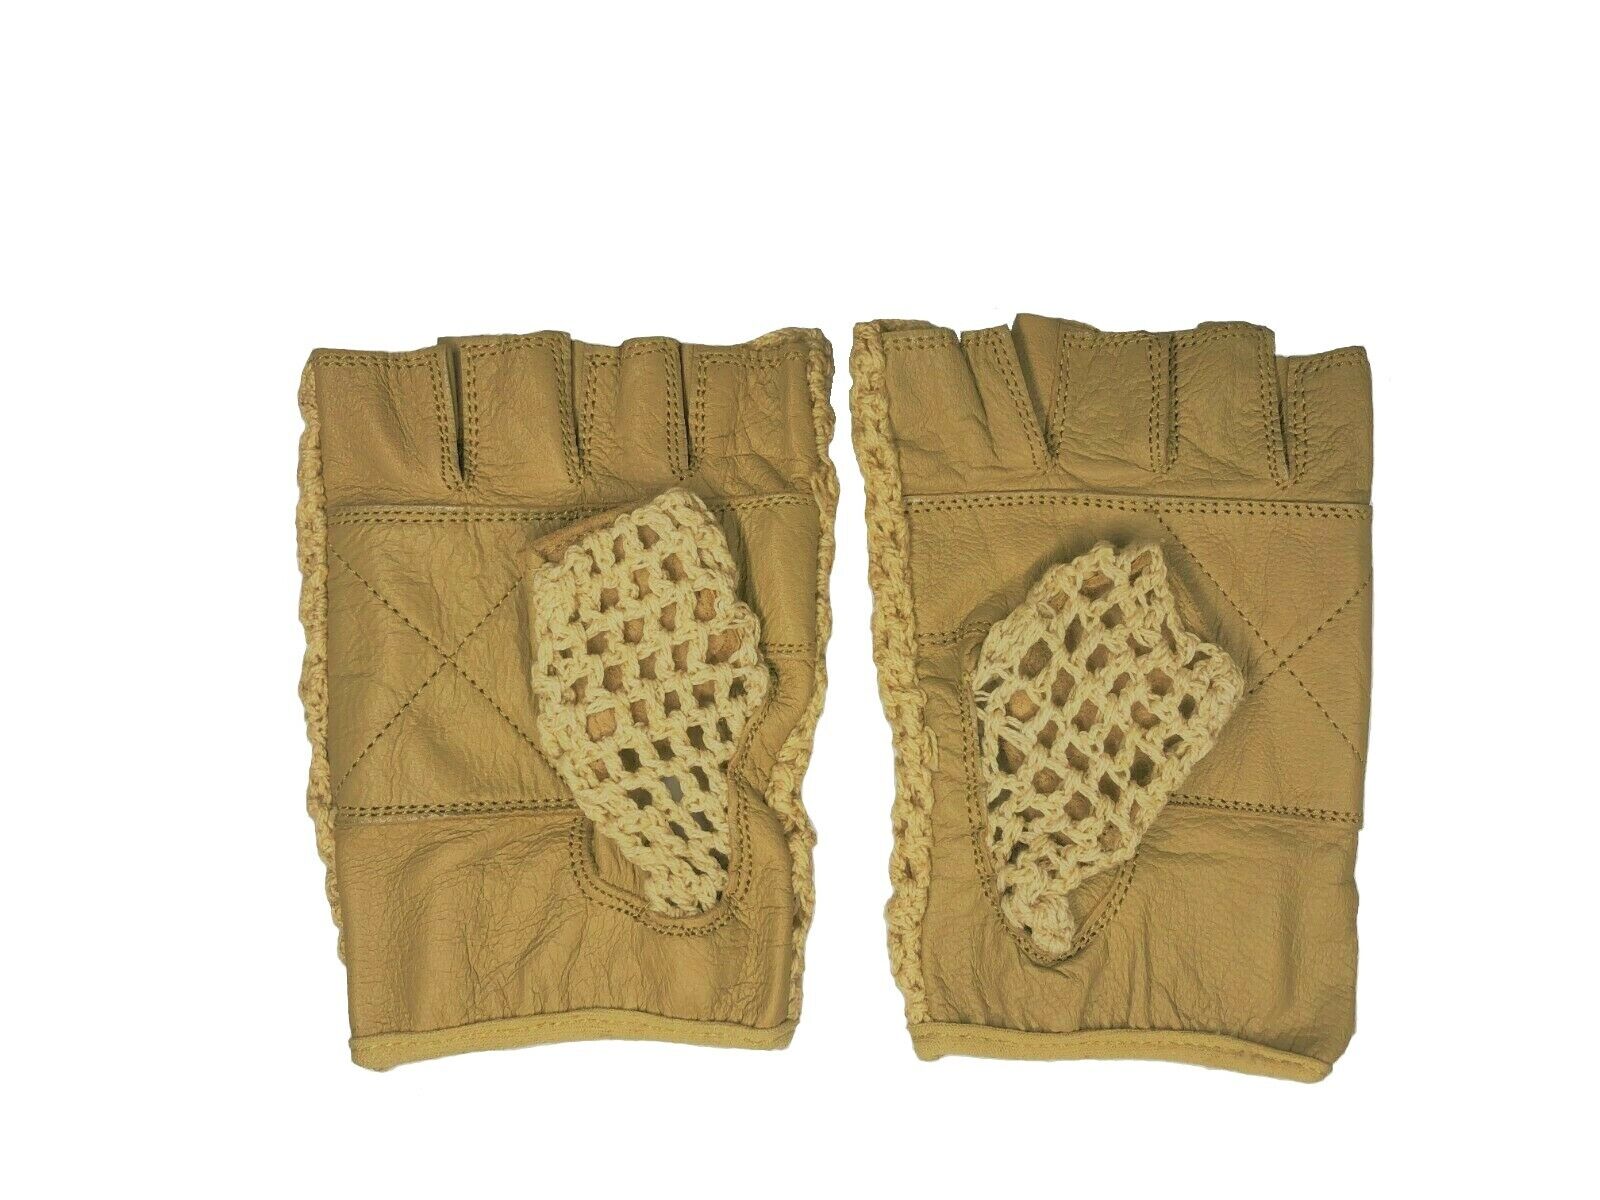 Leather Crochet Cycling / Bicycle Gloves - Vintage    British Tan